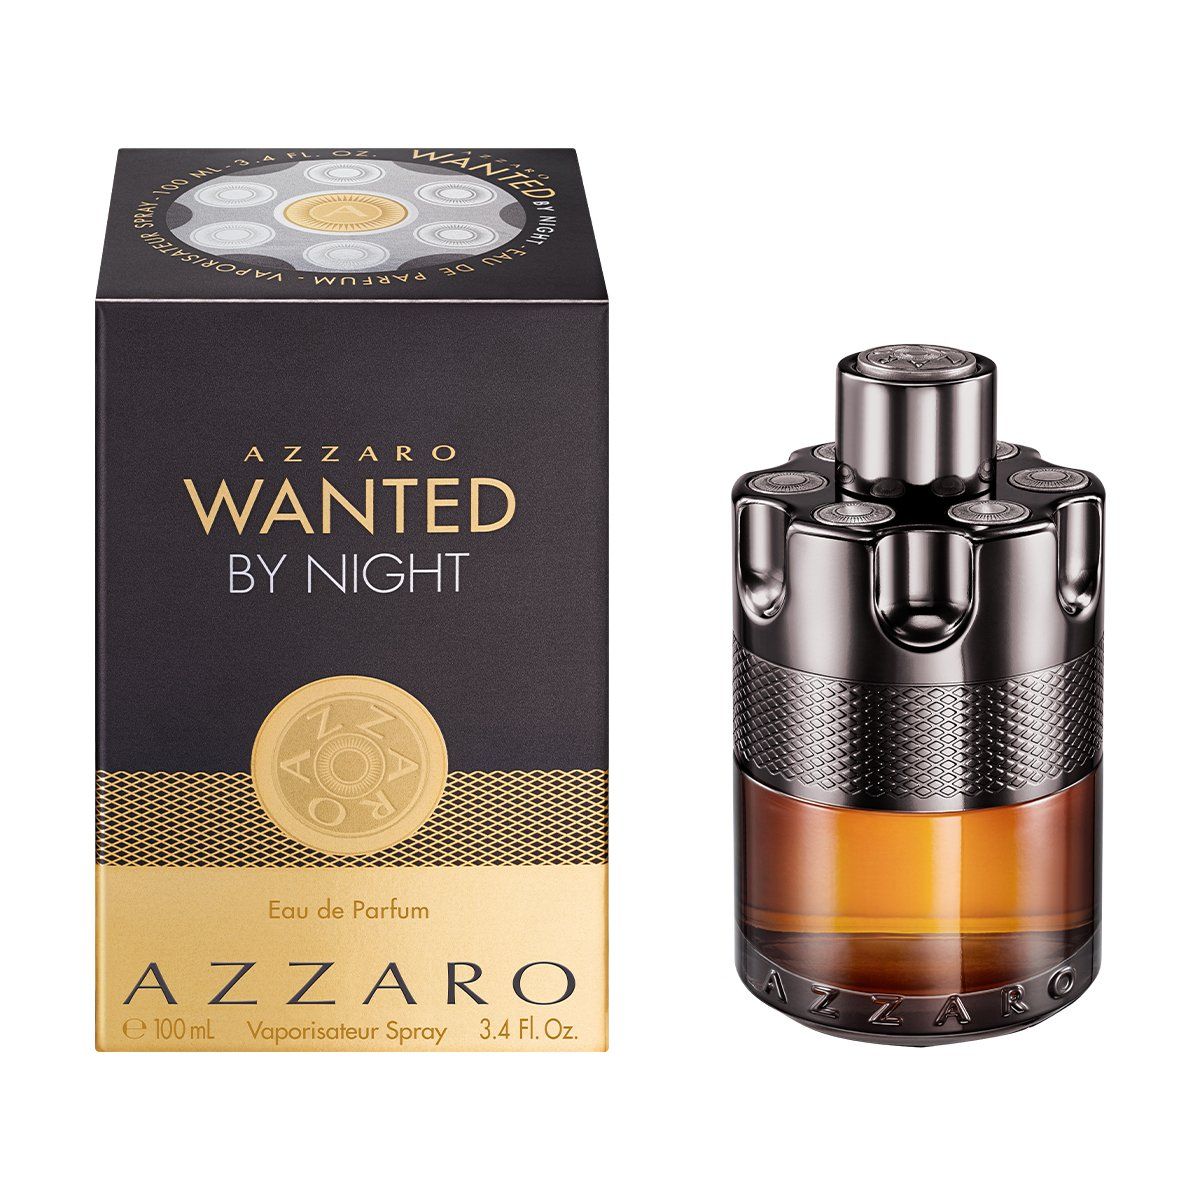 Azzaro Wanted by Night EDT 100ml